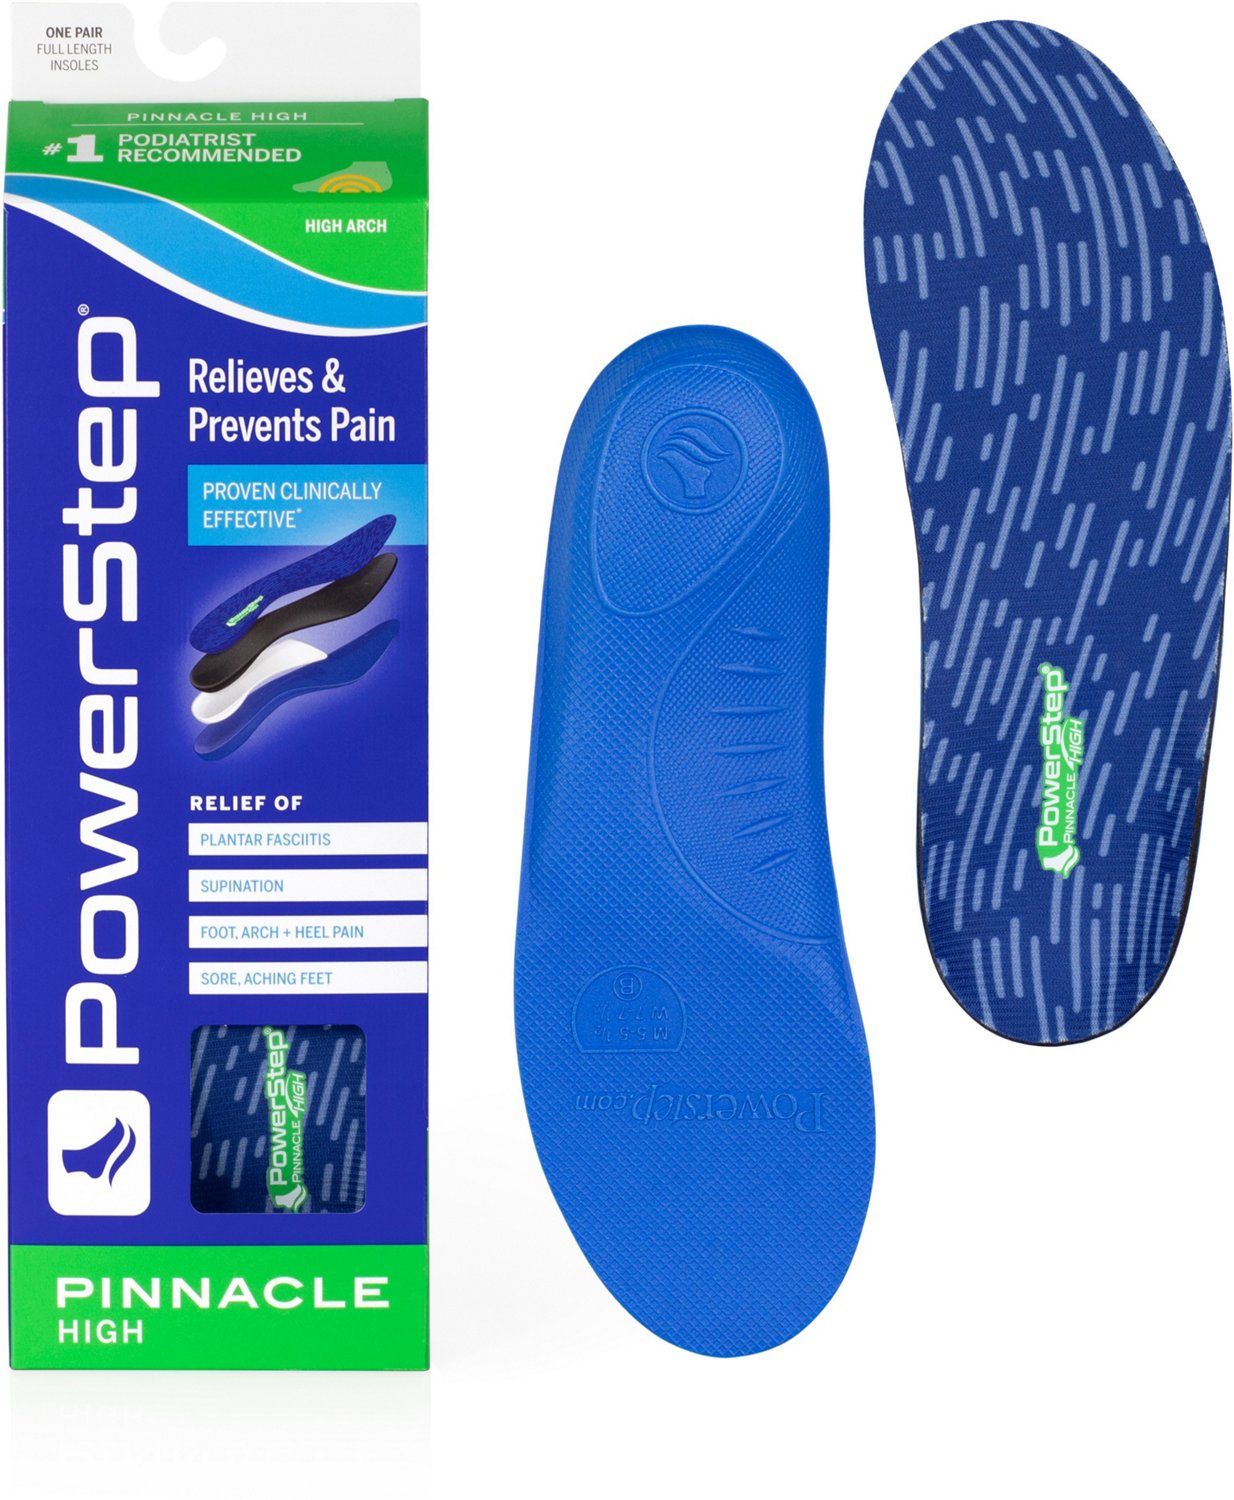 Powerstep Pinnacle High Arch Shoe Insoles | Academy